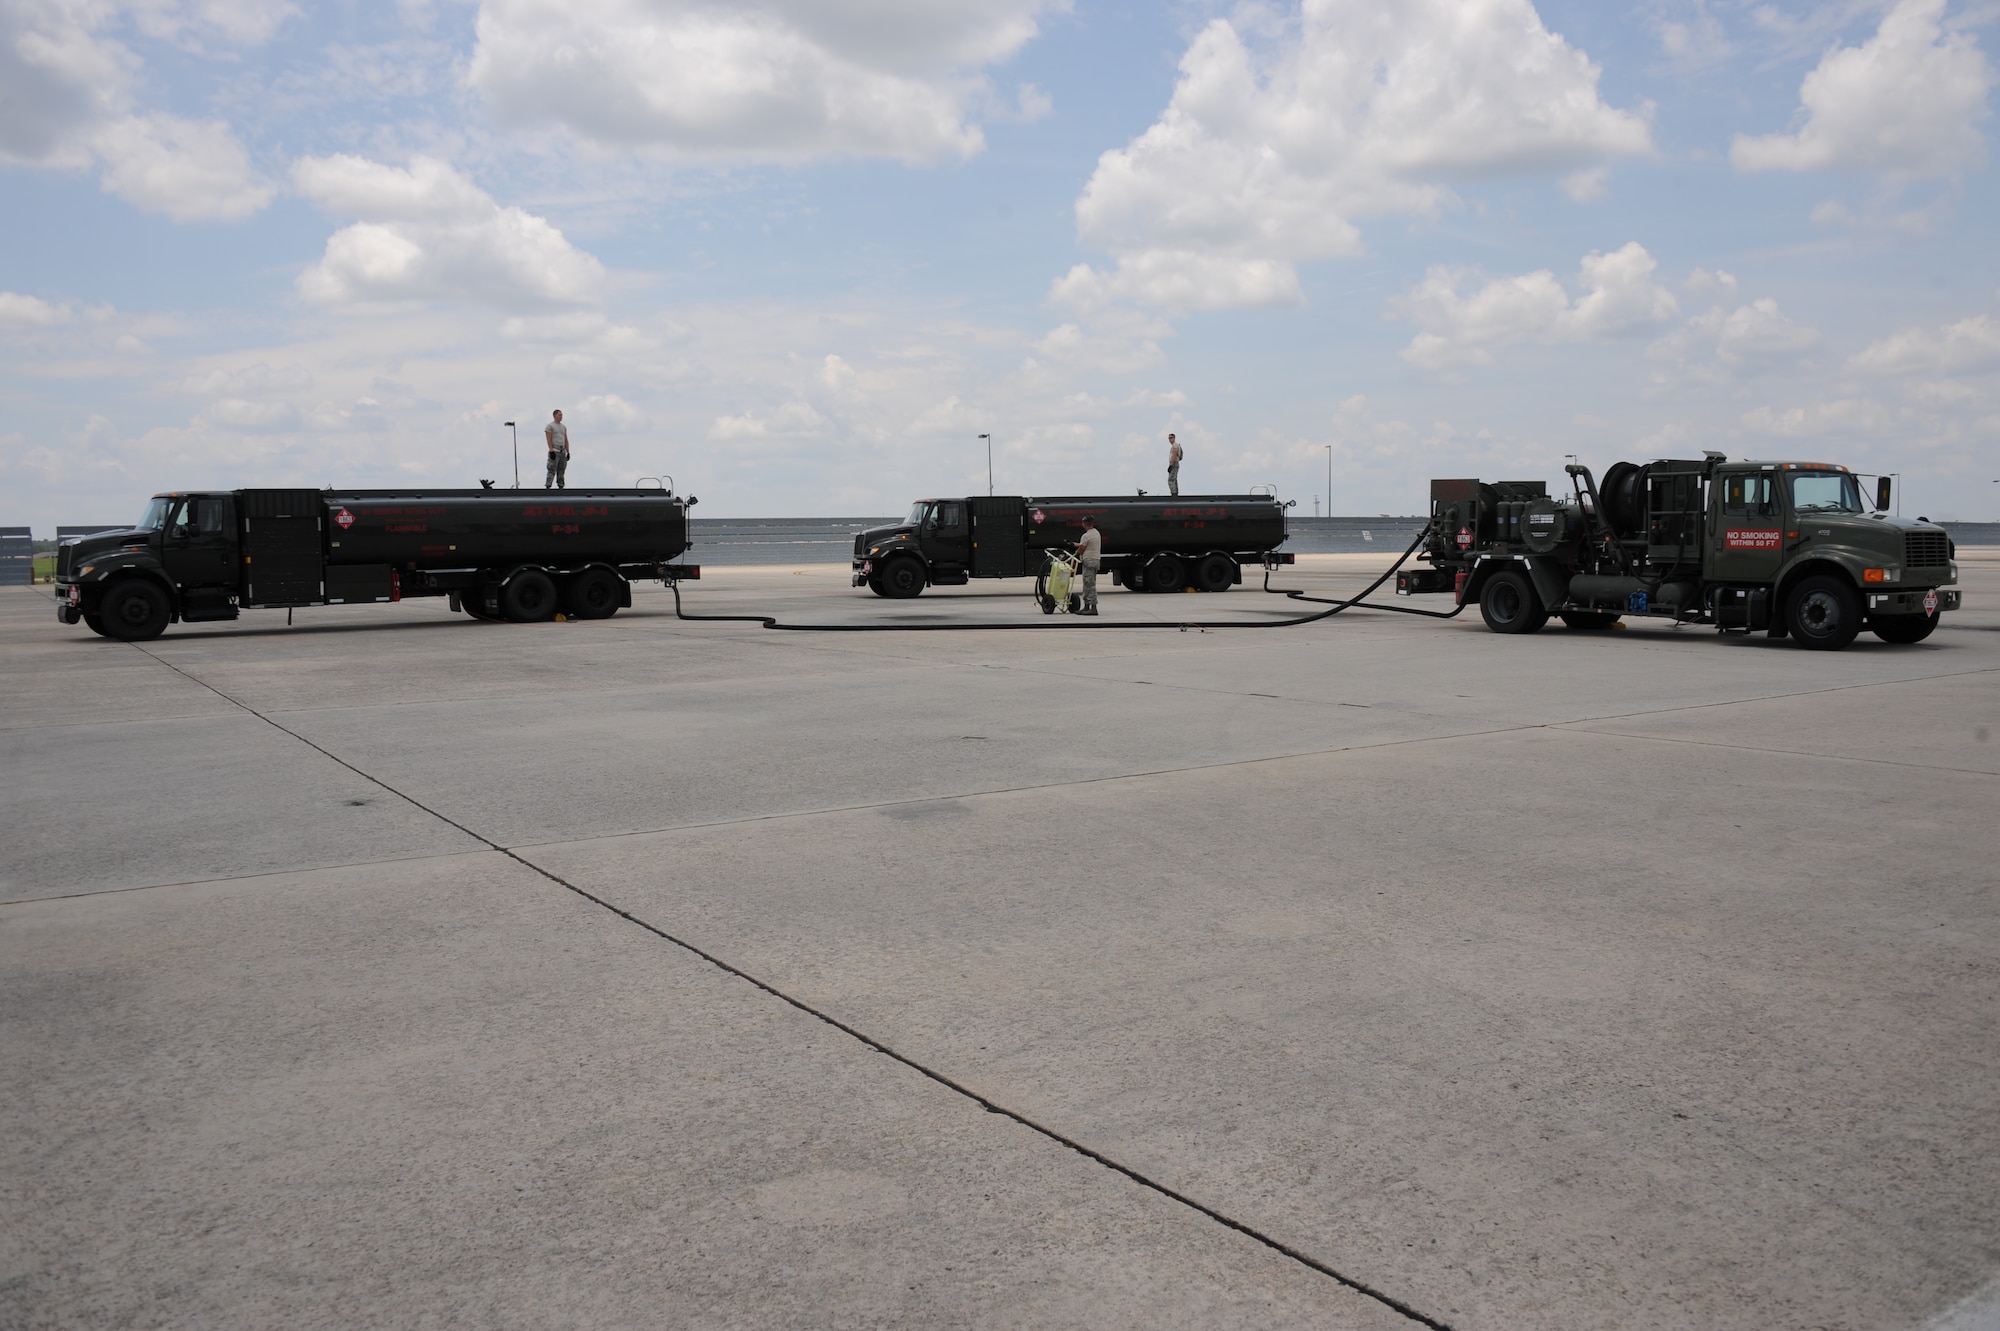 Fuel trucks from the Joint STARS 116th Logistics Readiness Flight petroleum, fuels, and oils (POL) section, perform a modified hot-pit procedure at Robins Air Force Base, Ga., June 14, 2012.  The POL section was participating in exercise Iron Dagger 2012.  During the procedure, Airmen from the 116th POL section worked with Airmen from the 4th Logistics Readiness Squadron from Seymour Johnson Air Force Base, N.C. to rapidly refuel F-15E Strike Eagles from the 4th Fighter Wing that were flying in the exercise.  (National Guard photo by Master Sgt. Roger Parsons/Released)